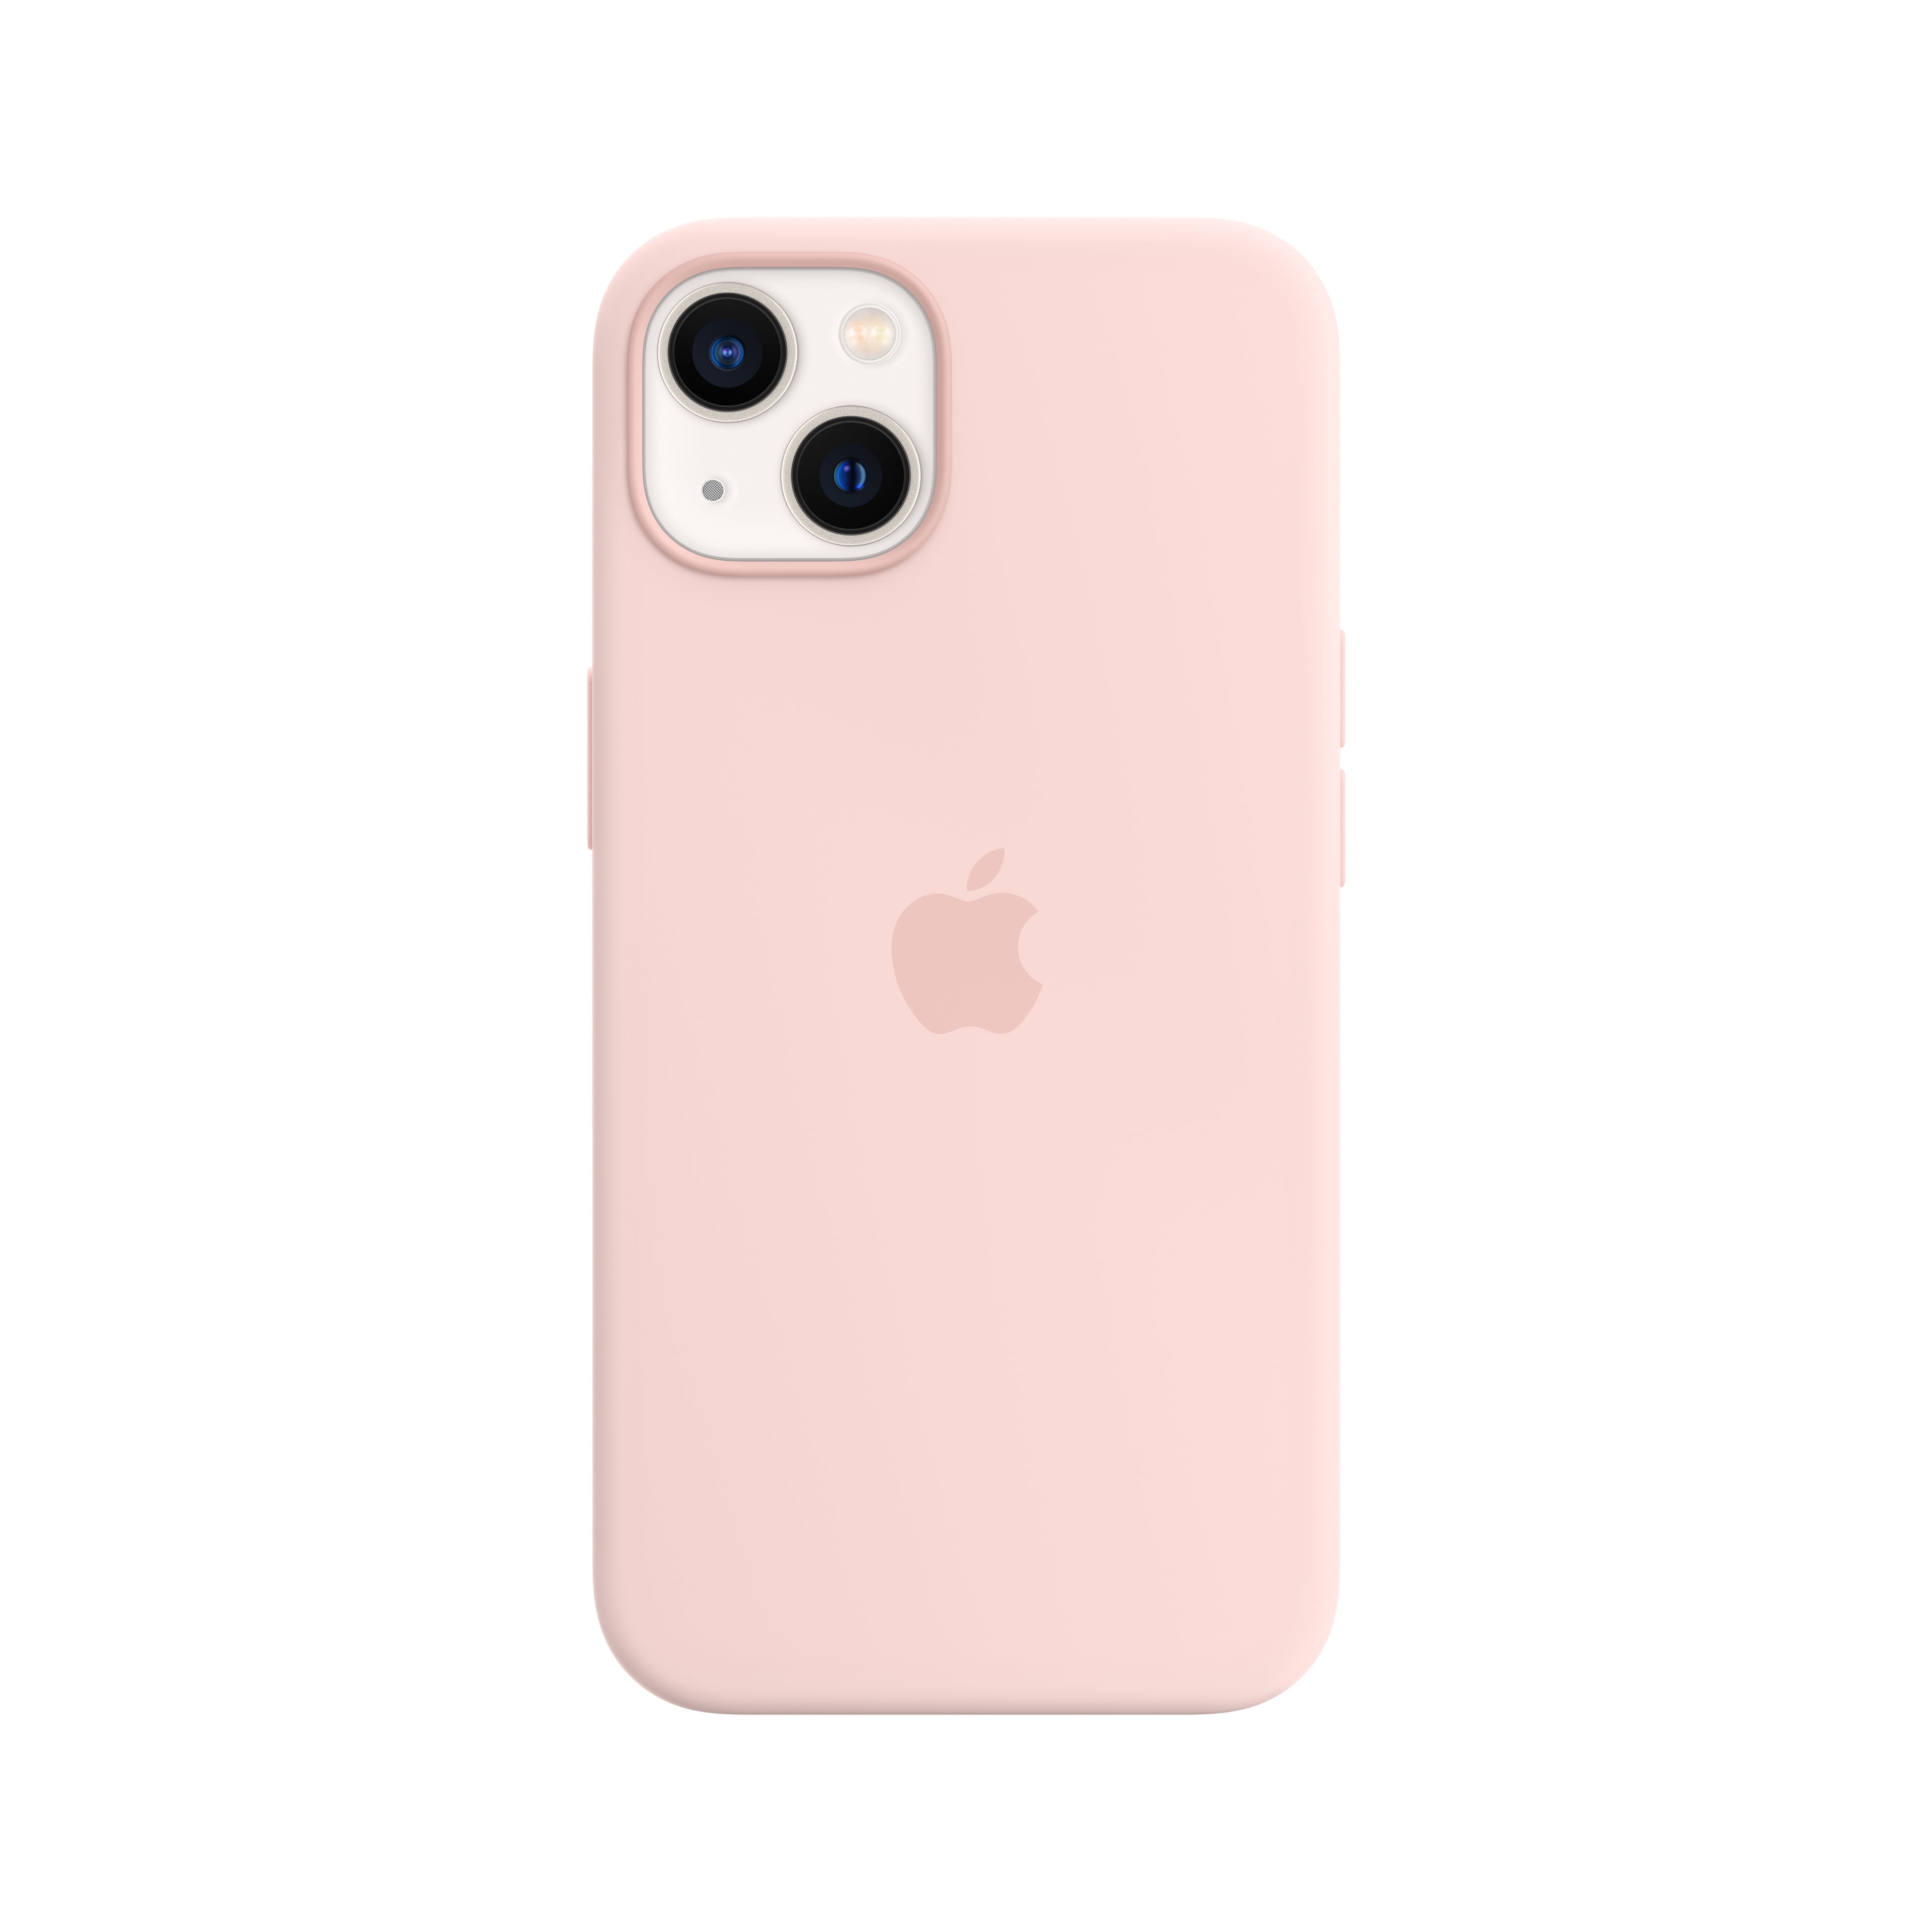 KIQ Square TPU Series For Cute iPhone 13 Pro Max Case For Women Girls  Compatible Apple iPhone 6.7 inch 2021 (Marble Holographic Light Pink Hot  Pink) 